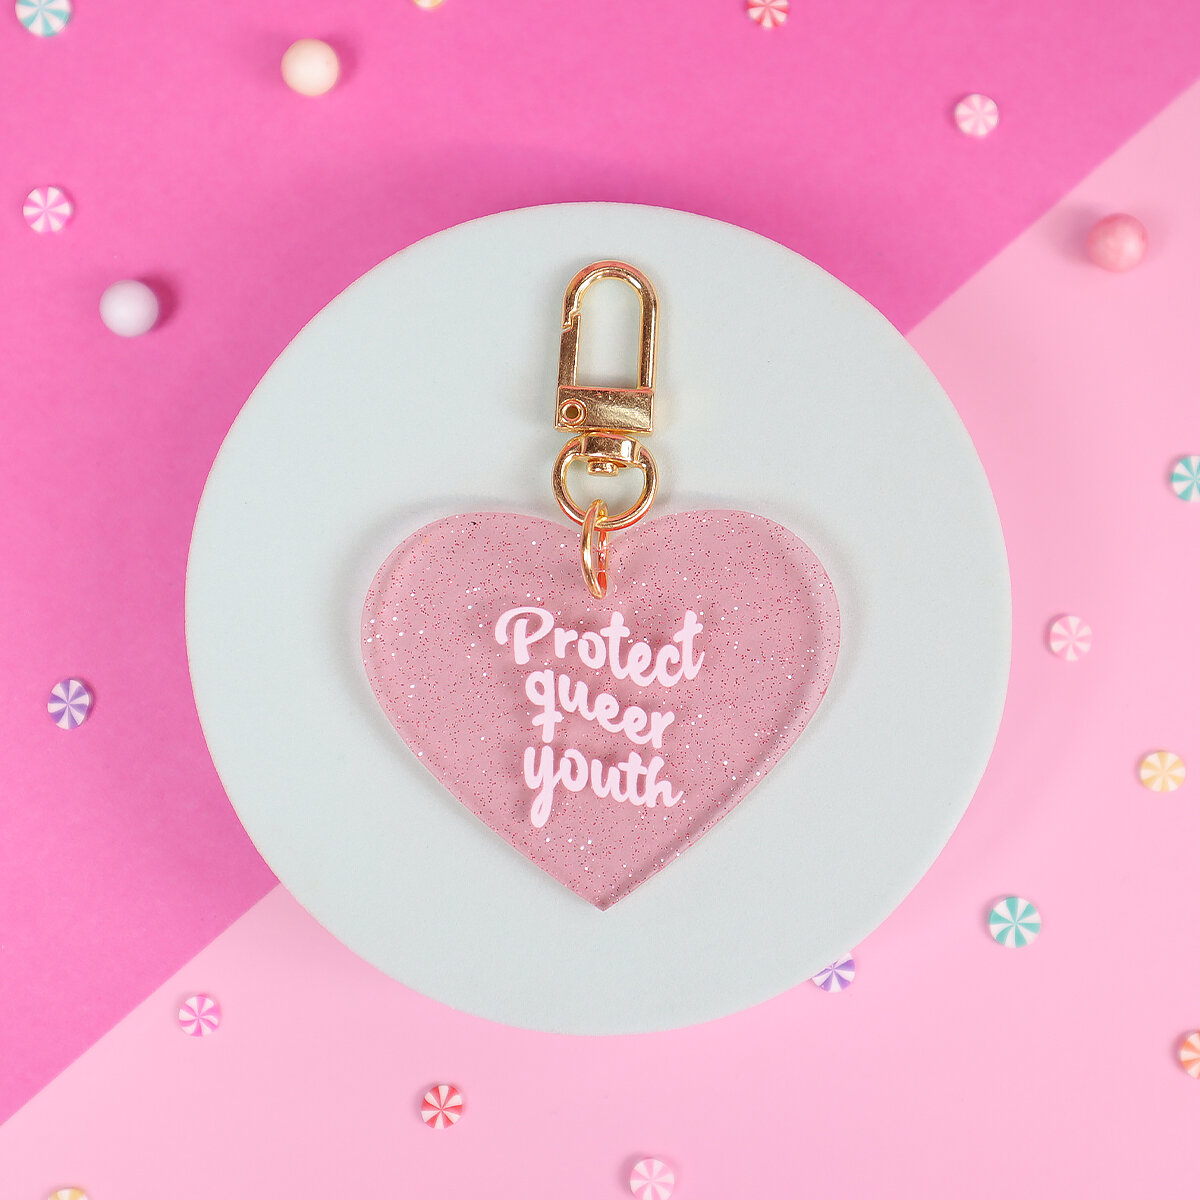 Glitter heart key ring - Protect queer youth